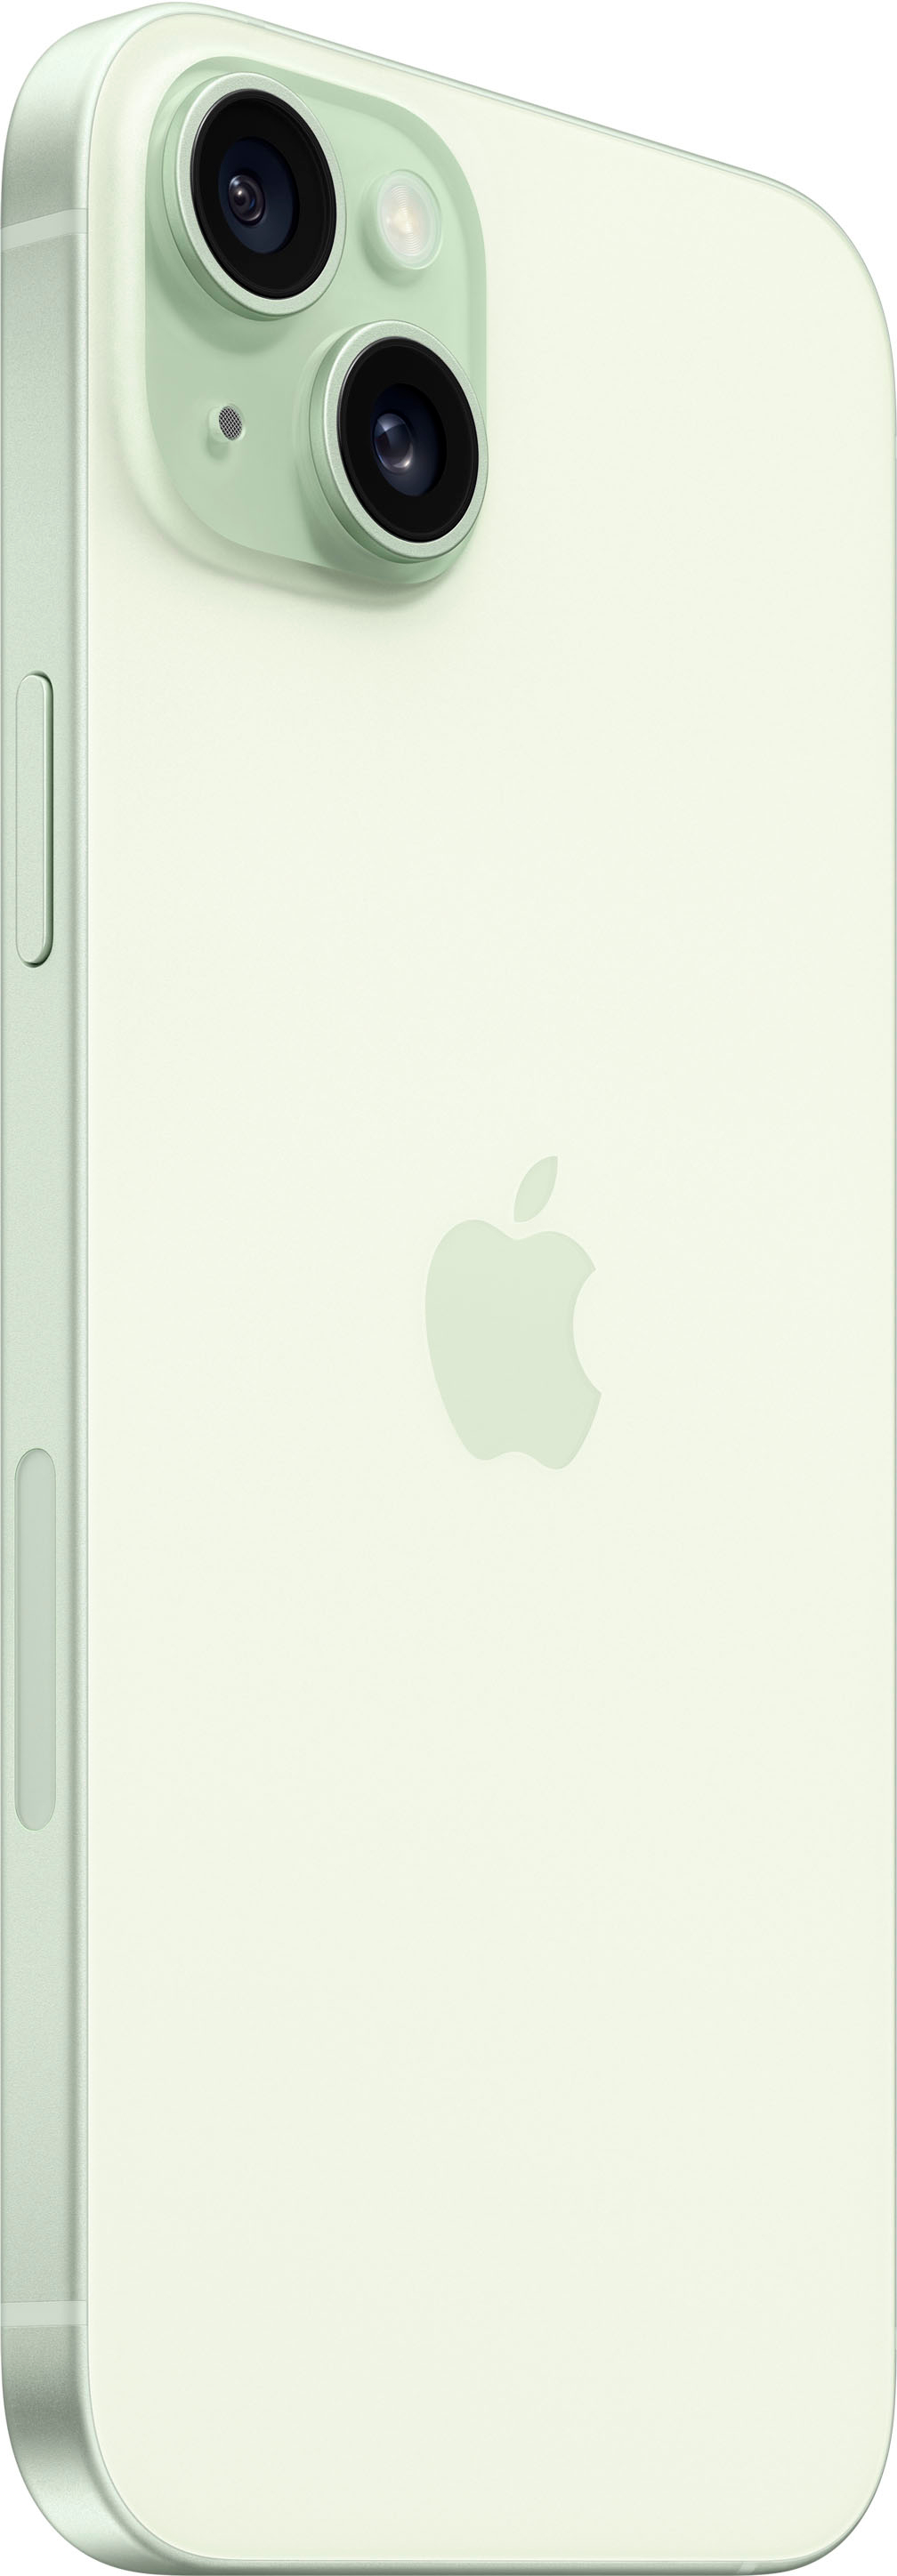 AT&T Apple iPhone 11 128GB, Green 